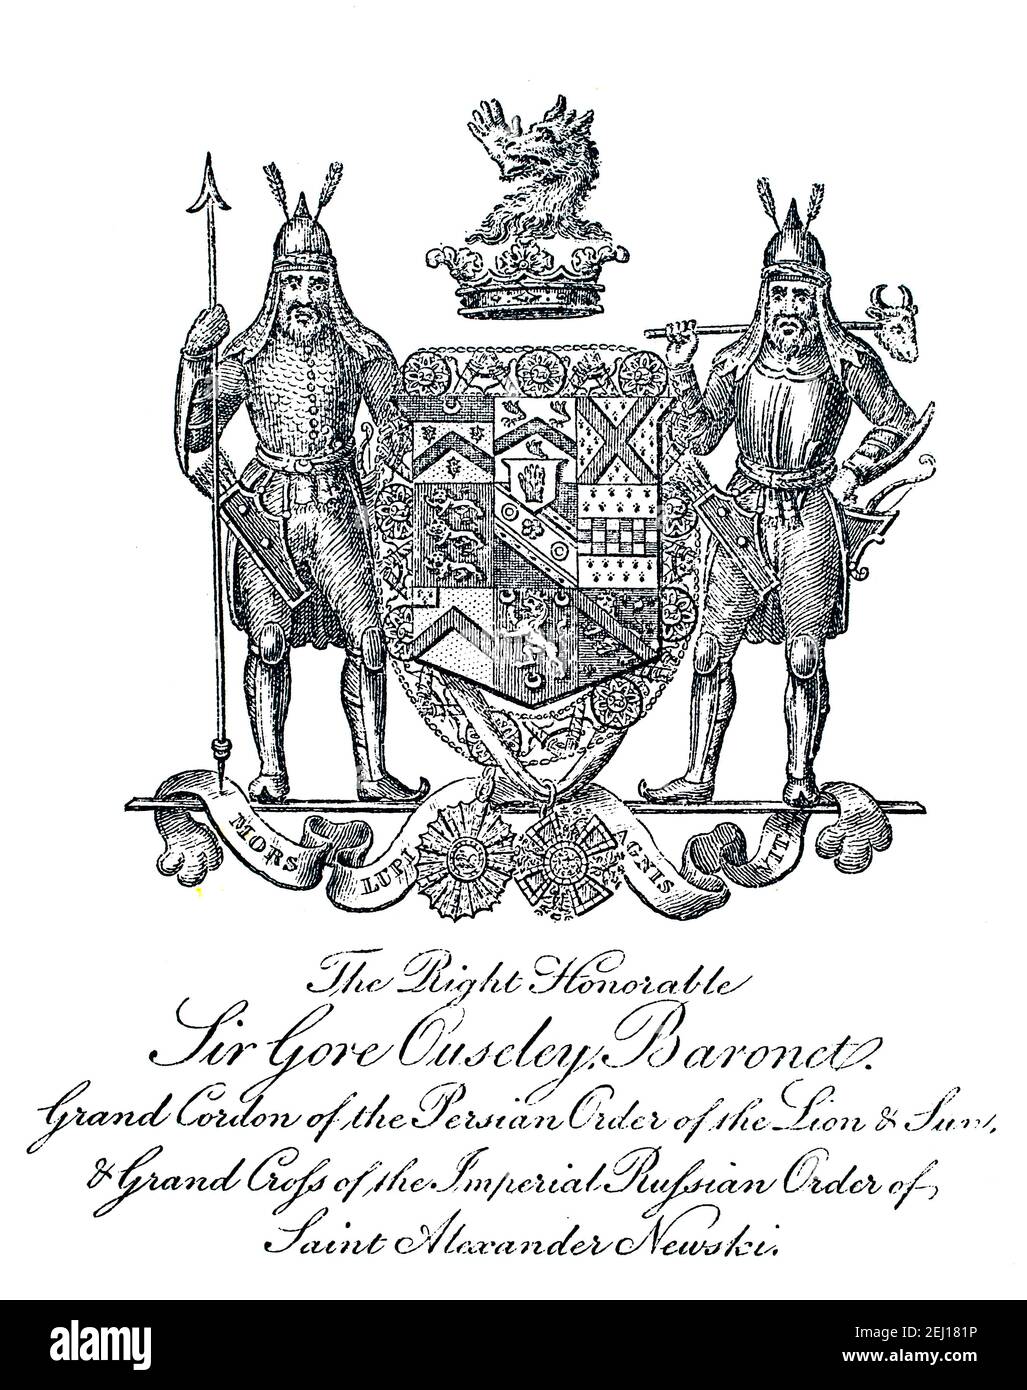 bookplate of oriental scholar, British entrepreneur, linguist and diplomat, Sir Gore Ousley baronet, (1770-1844) Stock Photo